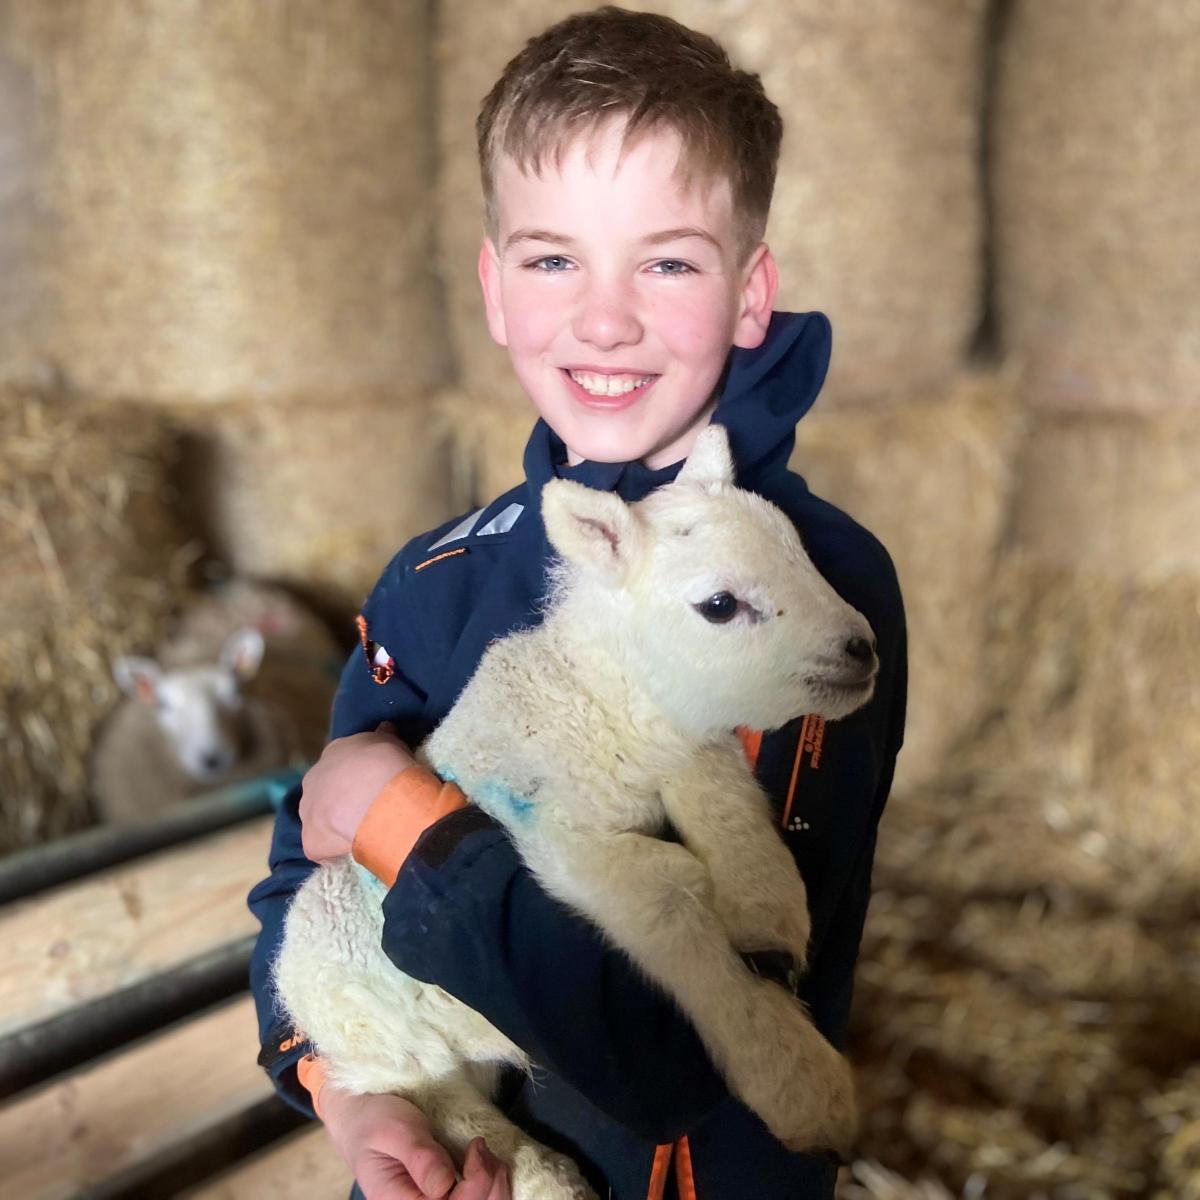 Craigenhill Park - Will Russell (11) of Craigenhill Park, Kilncadzow,  All smiles tending to his micro-flock